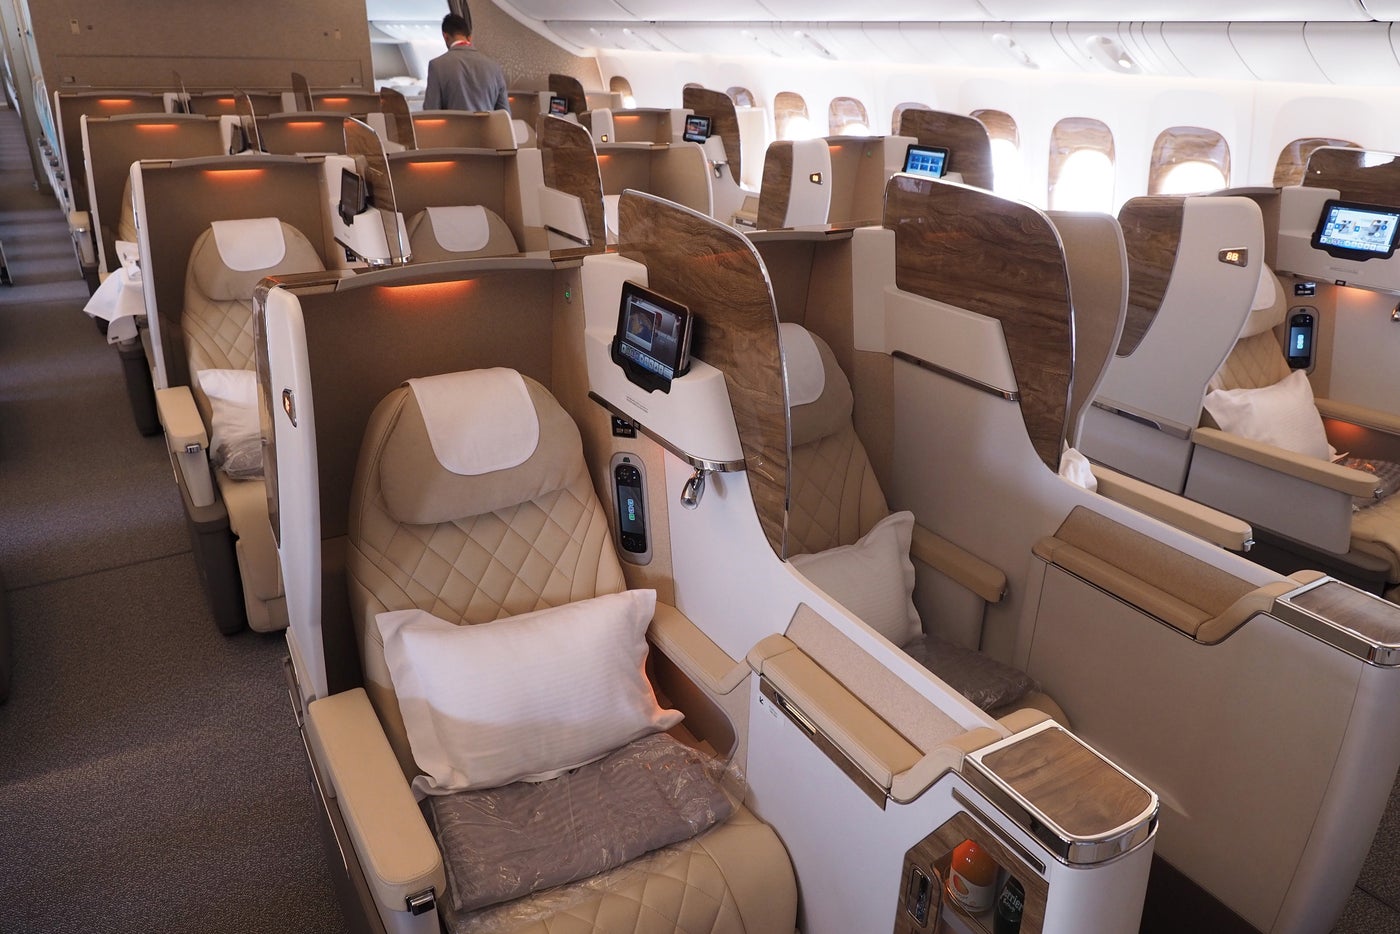 Emirates Fancy New Business Class Still Has Middle Seats 5255